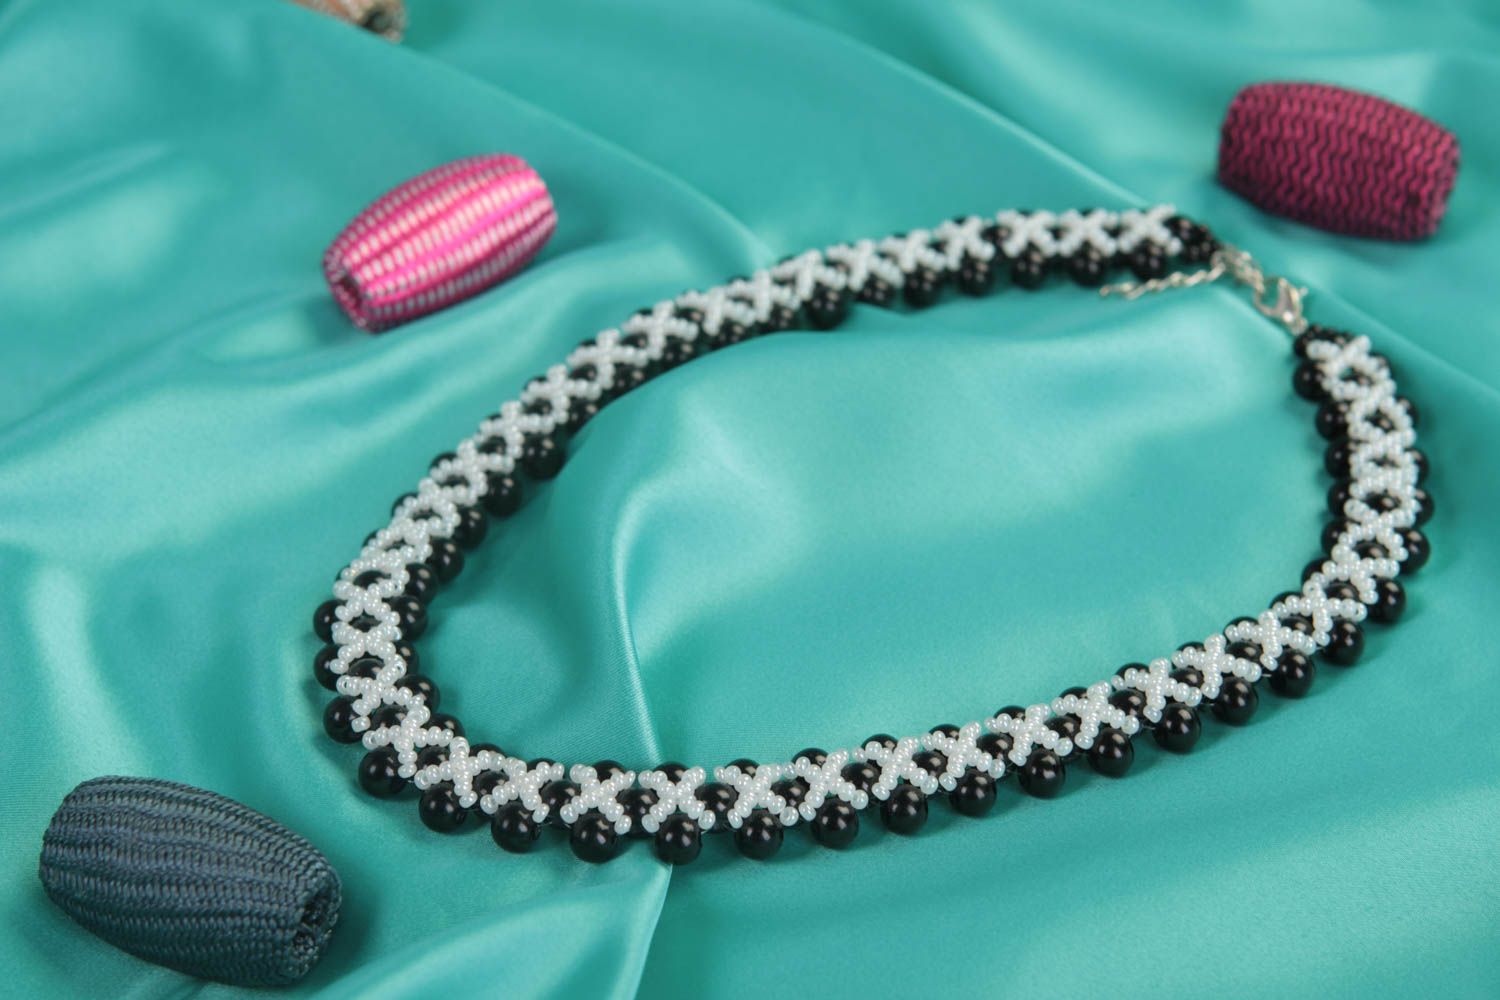 Long necklace handmade jewelry bead necklace beaded jewelry presents for her photo 1